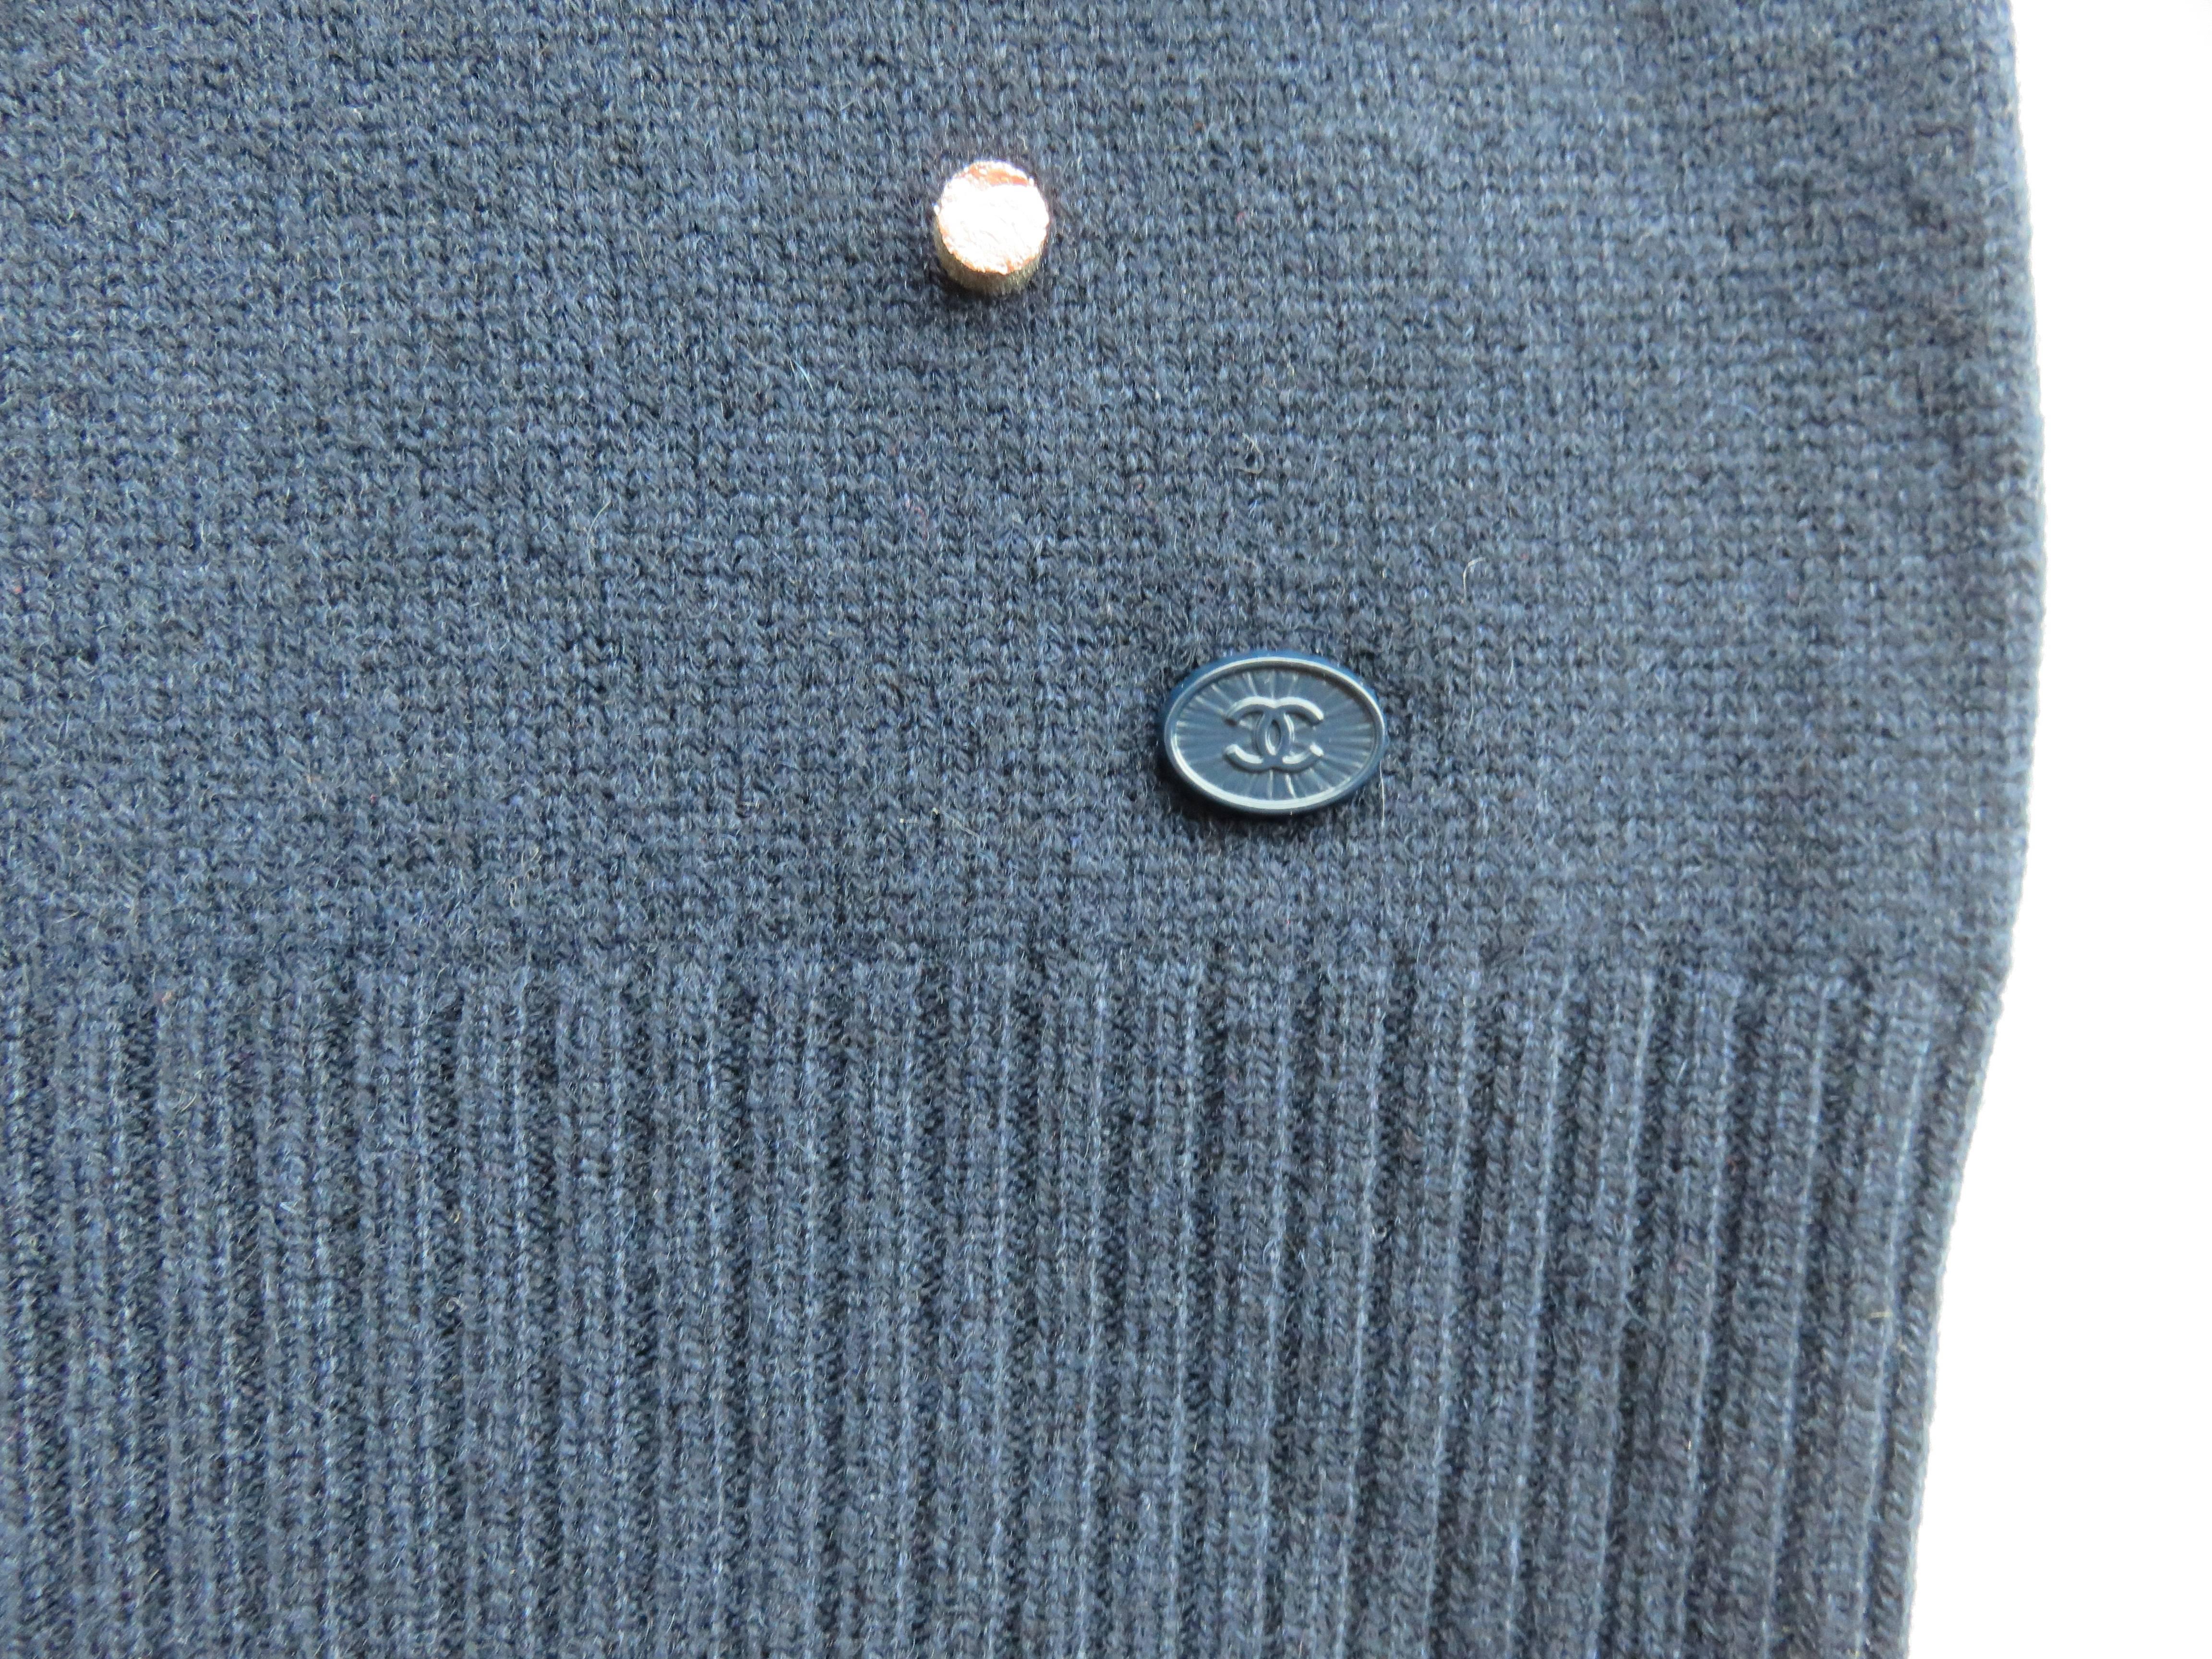 2014 CHANEL PARIS Pure cashmere embellished sweater For Sale 5